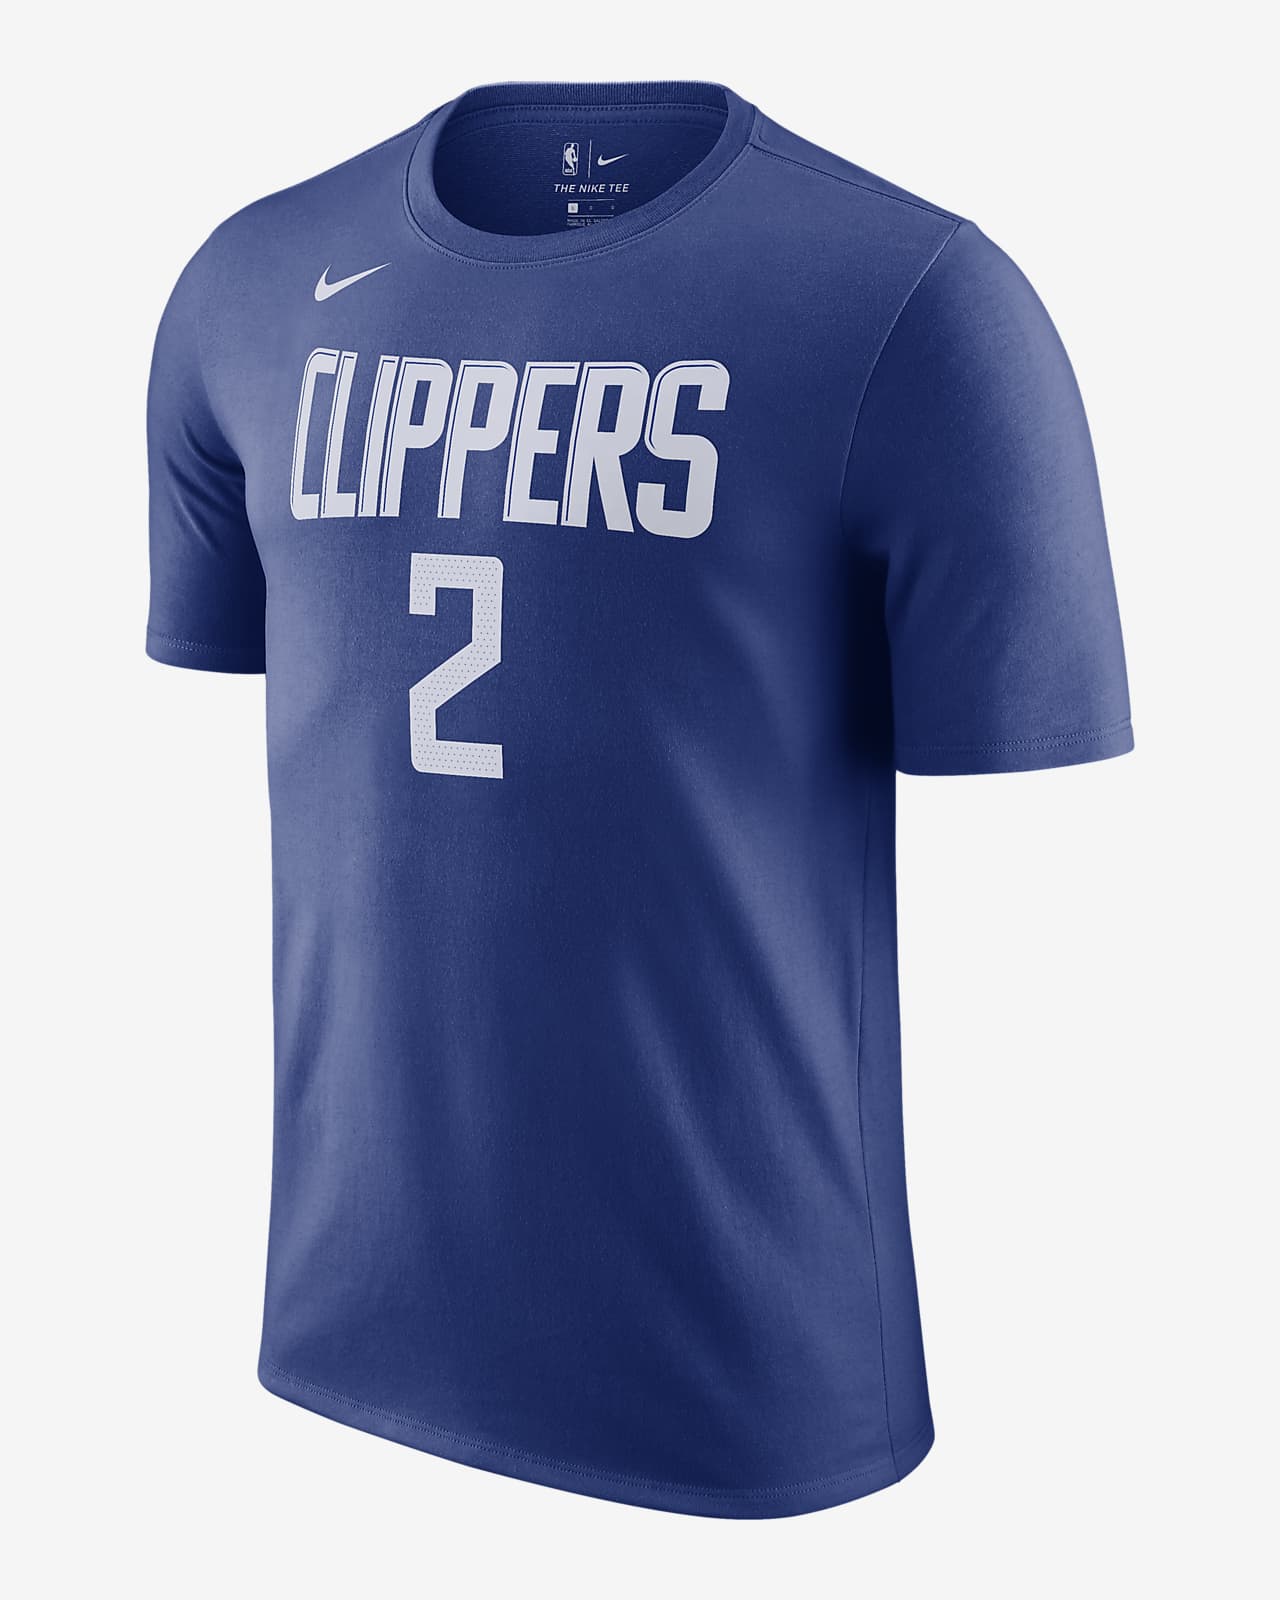 Los Angeles Clippers Men's Nike NBA T-Shirt